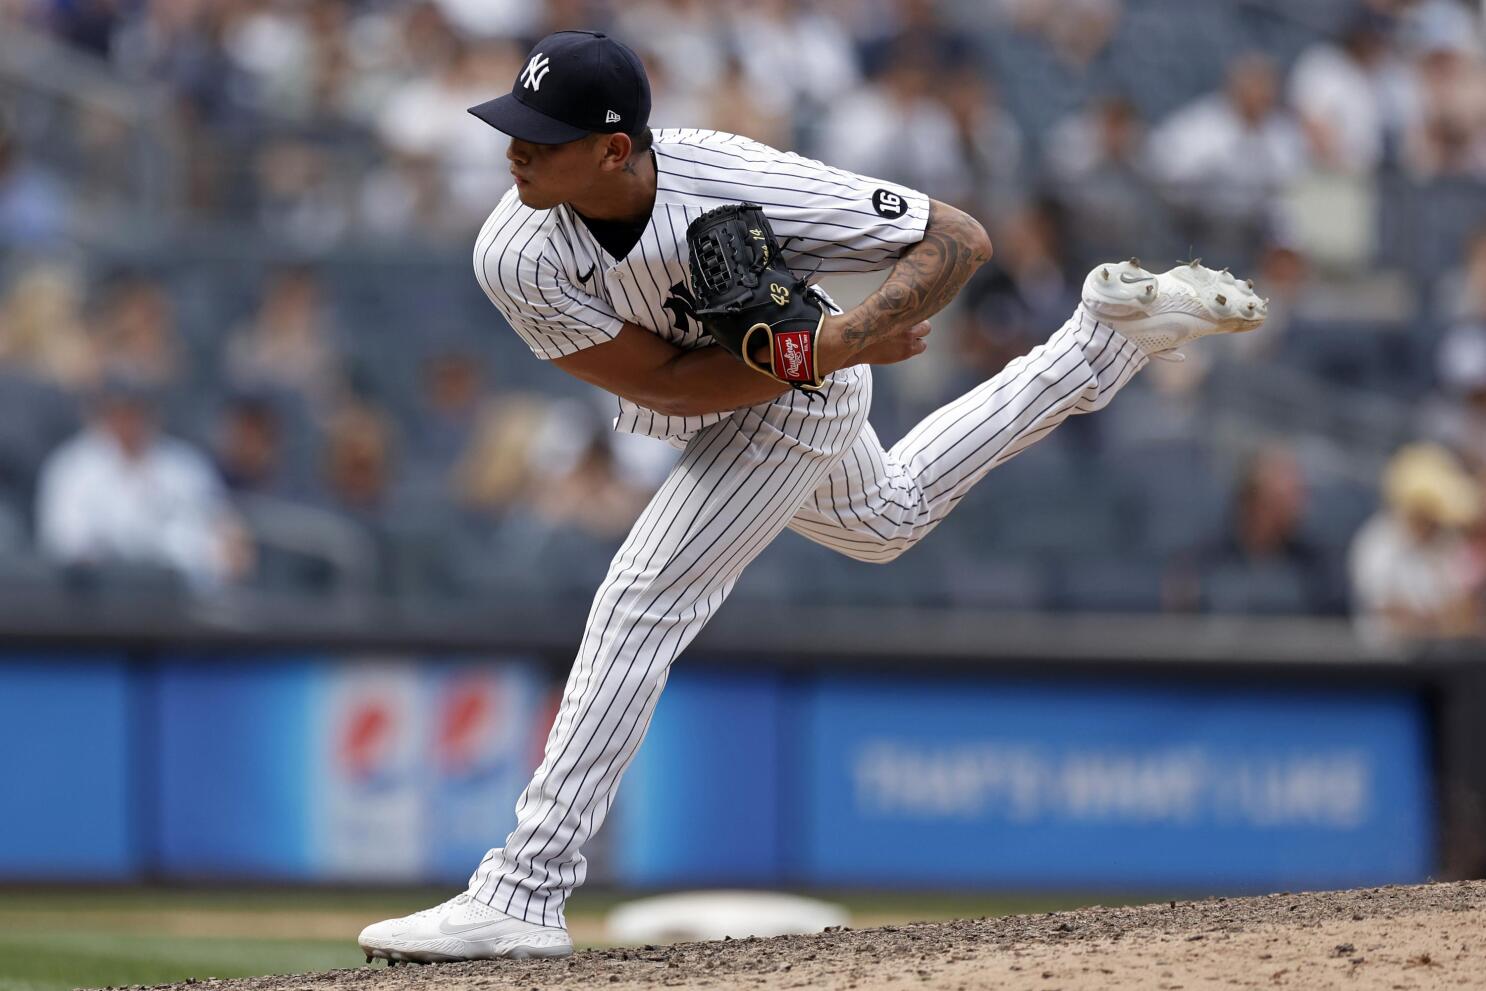 Ex-Yankee Aroldis Chapman blows Rangers' chance to clinch with 8